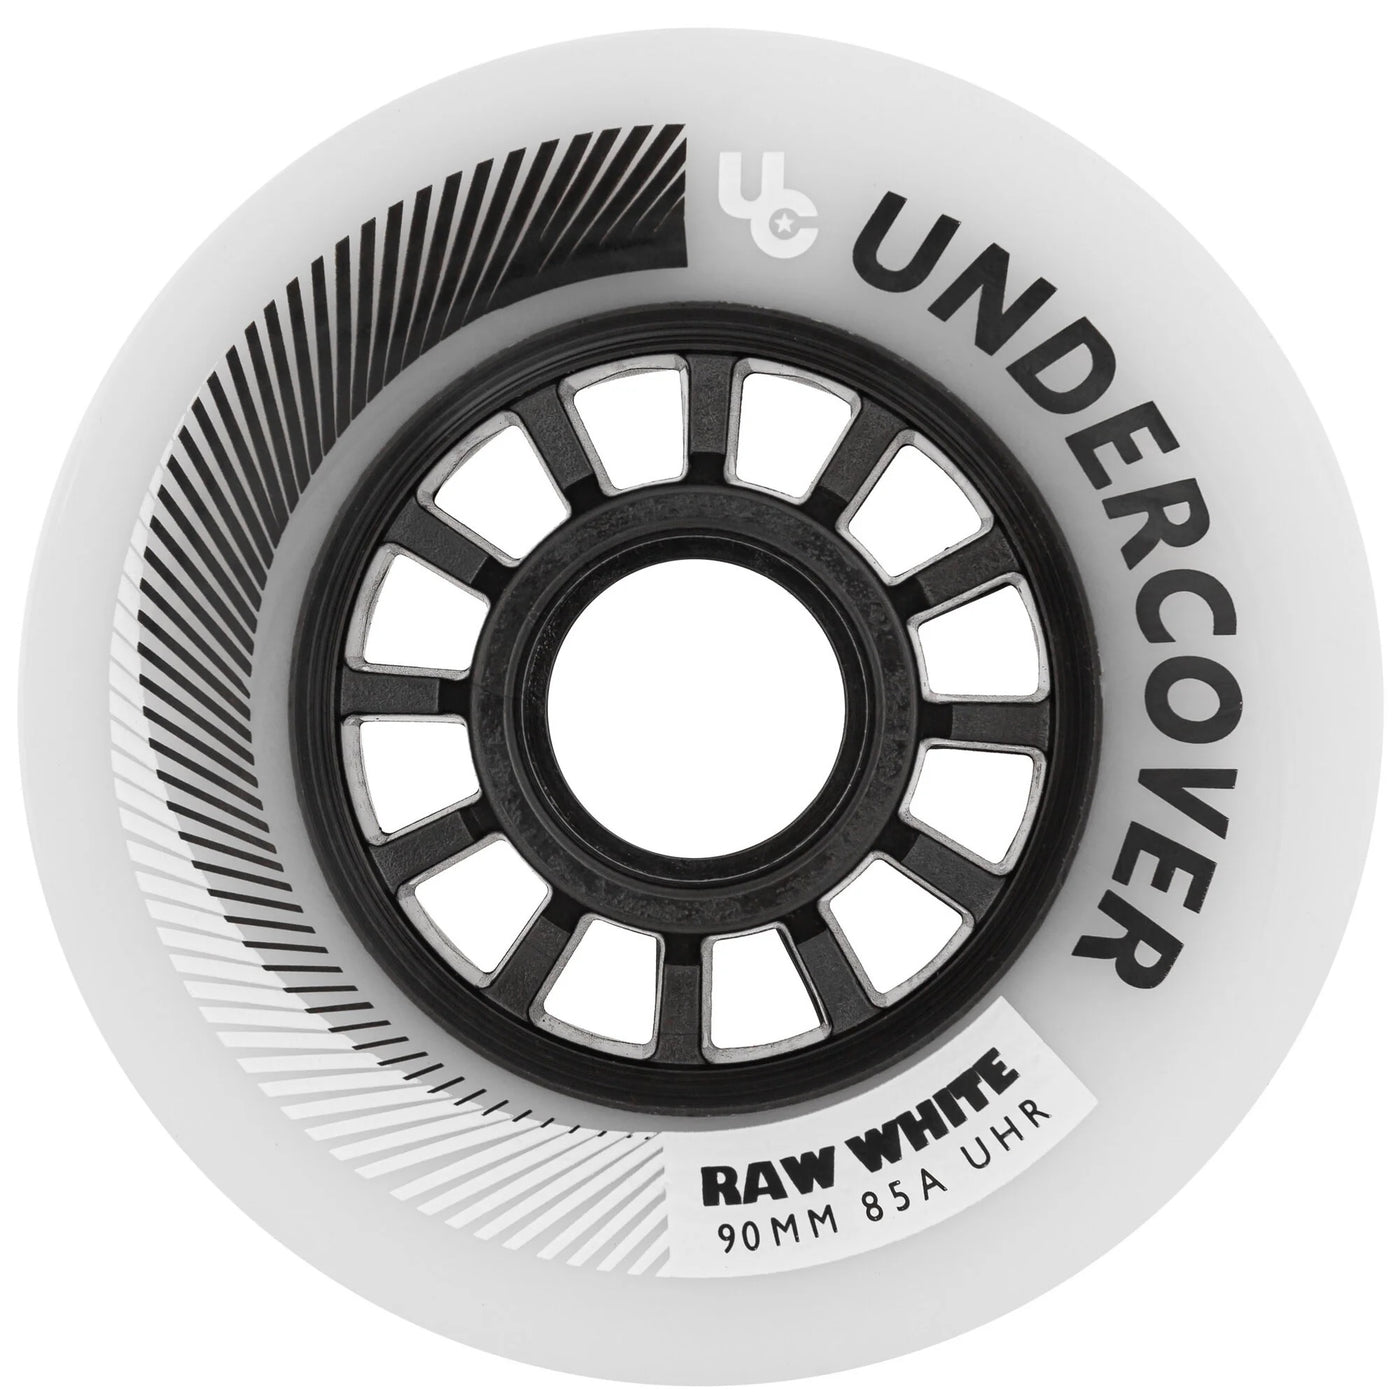 Undercover Raw White Wheels 90mm 85a - Set of 4